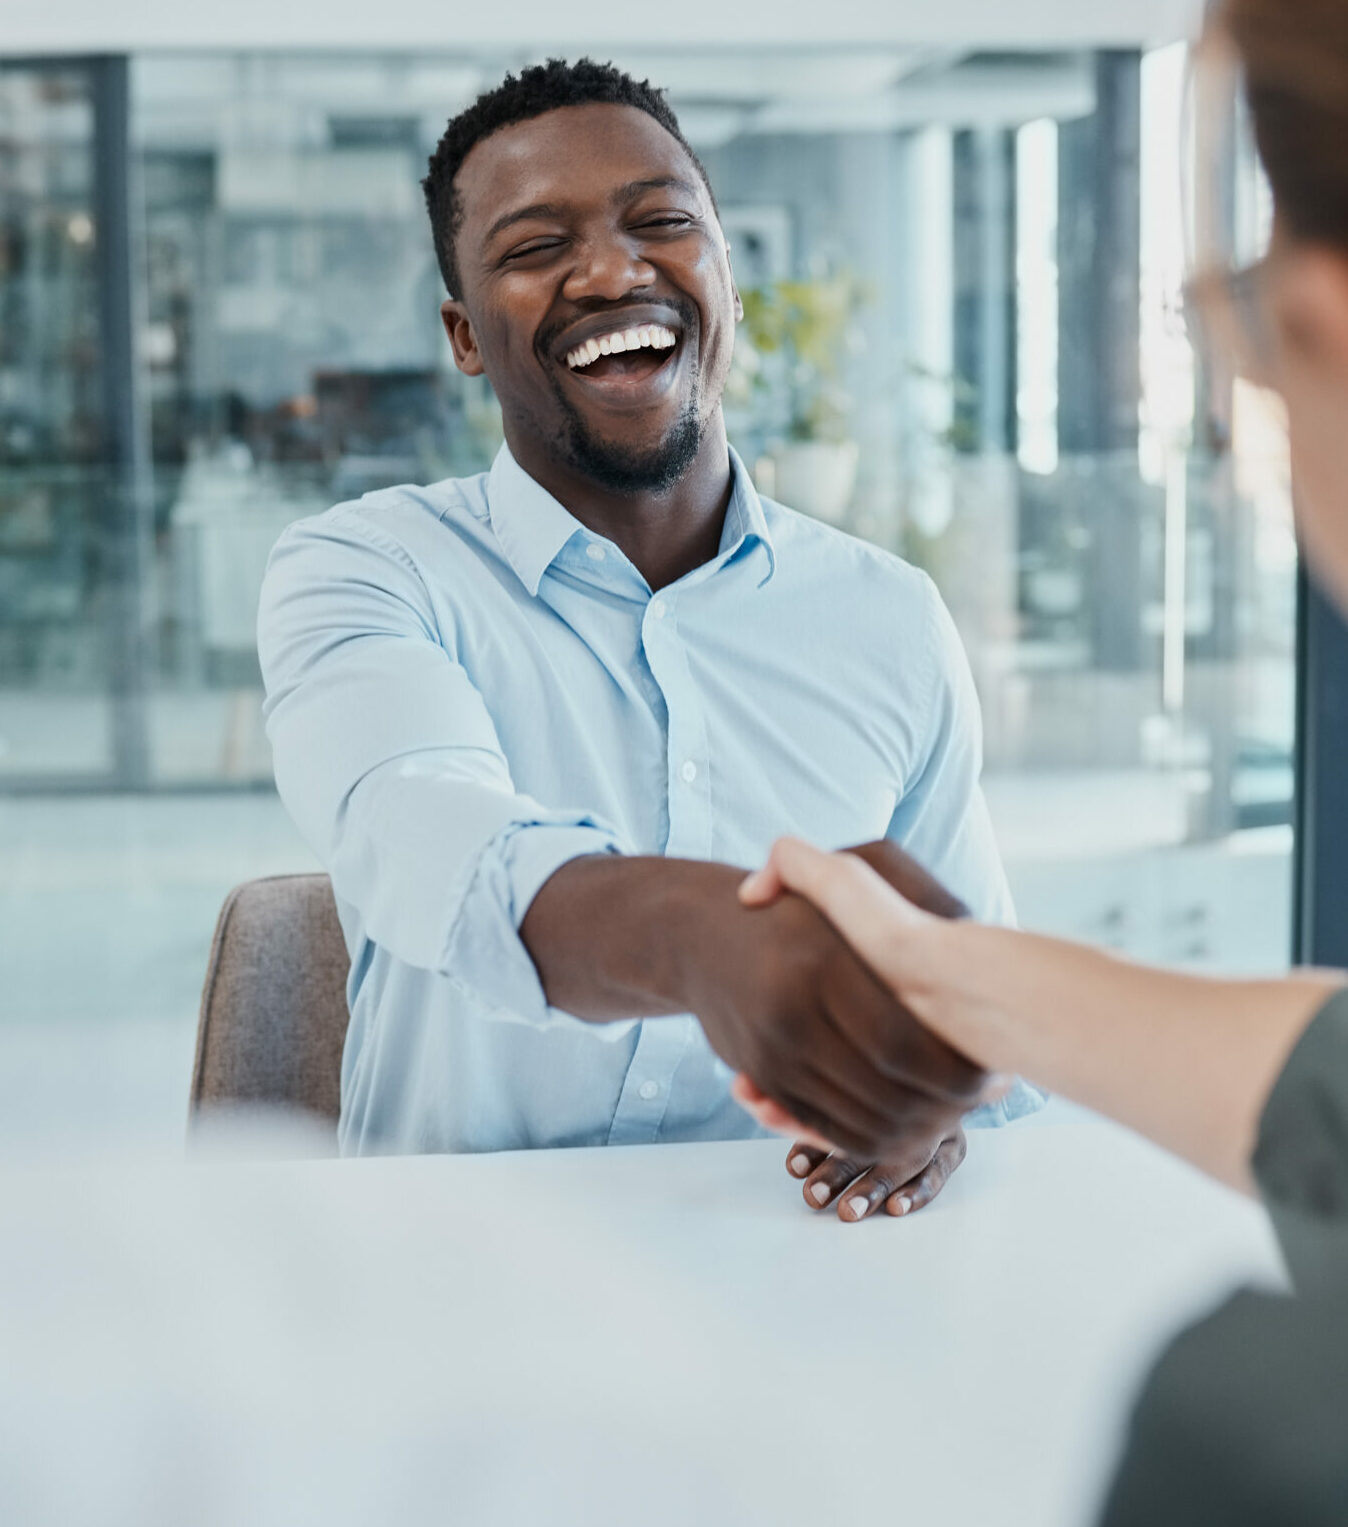 Handshake, interview and business people for diversity partnership, contract deal or b2b welcome meeting, Collaboration, agreement and recruitment black man shaking hands for career or job onboarding.